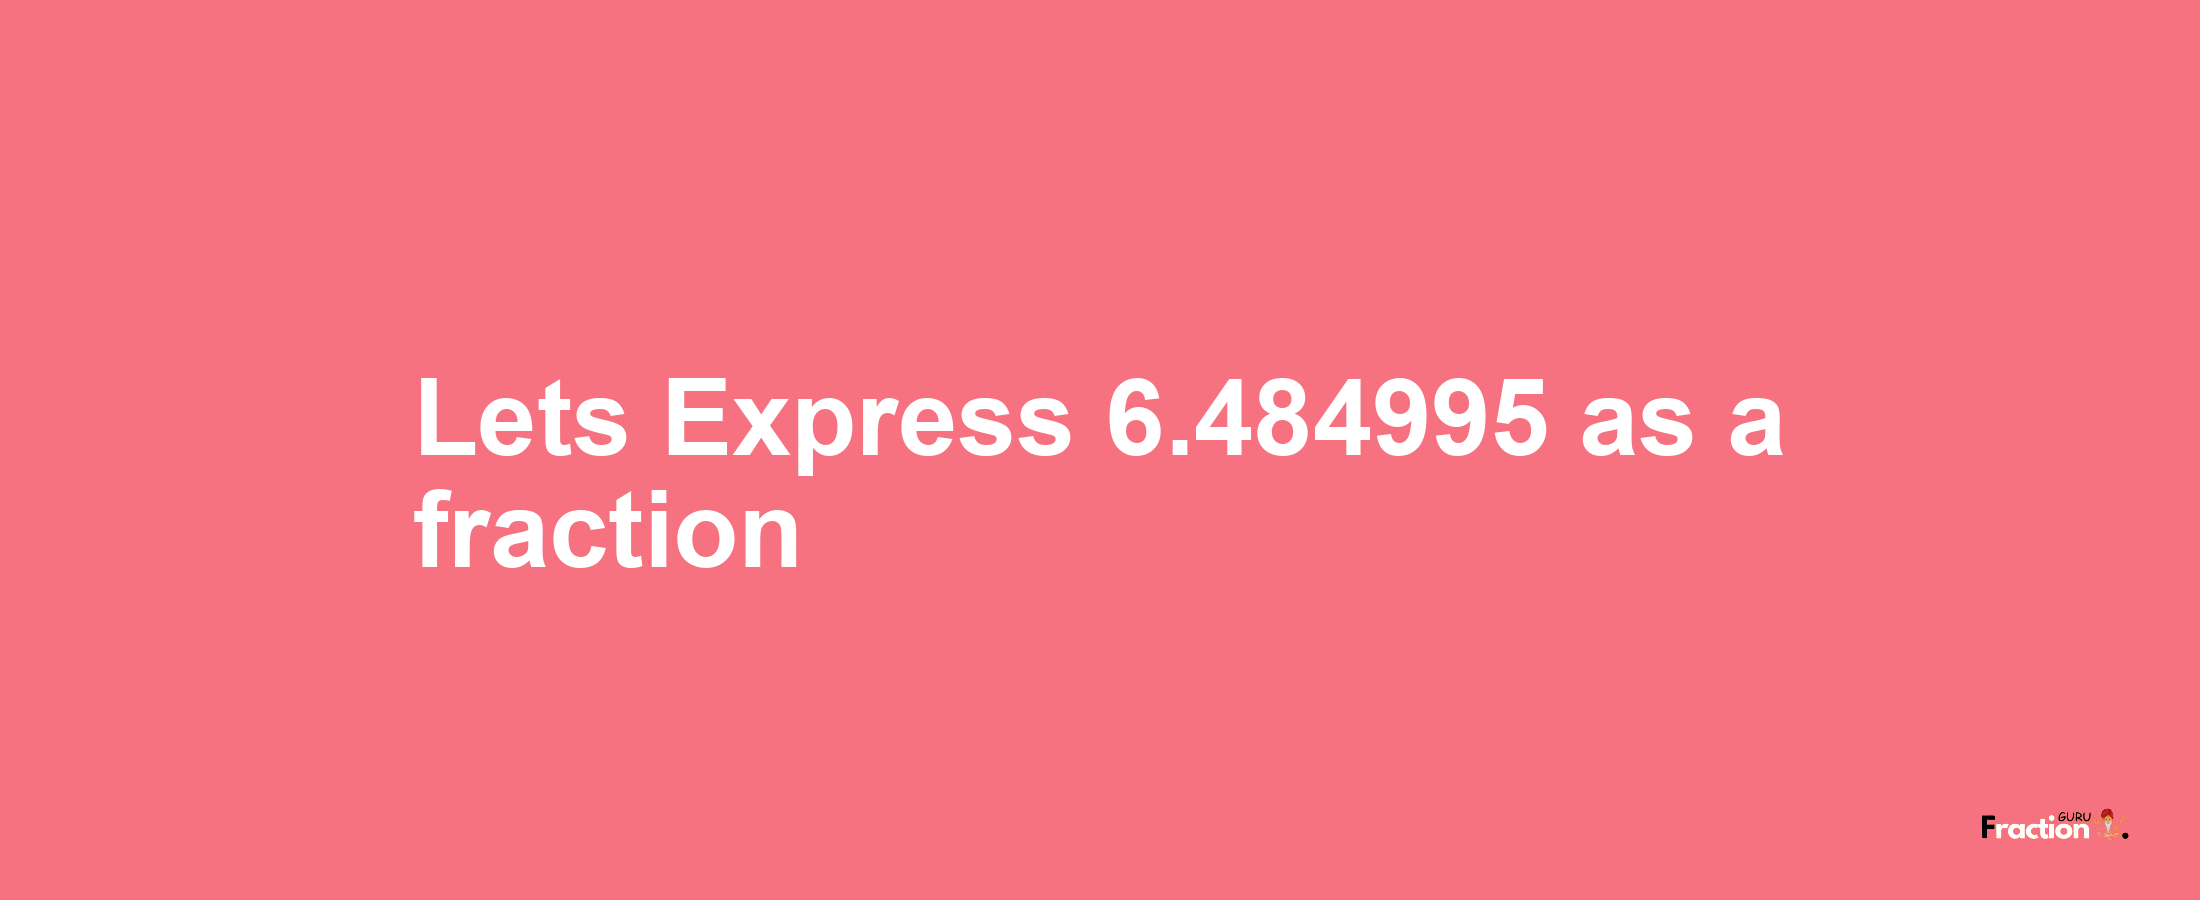 Lets Express 6.484995 as afraction